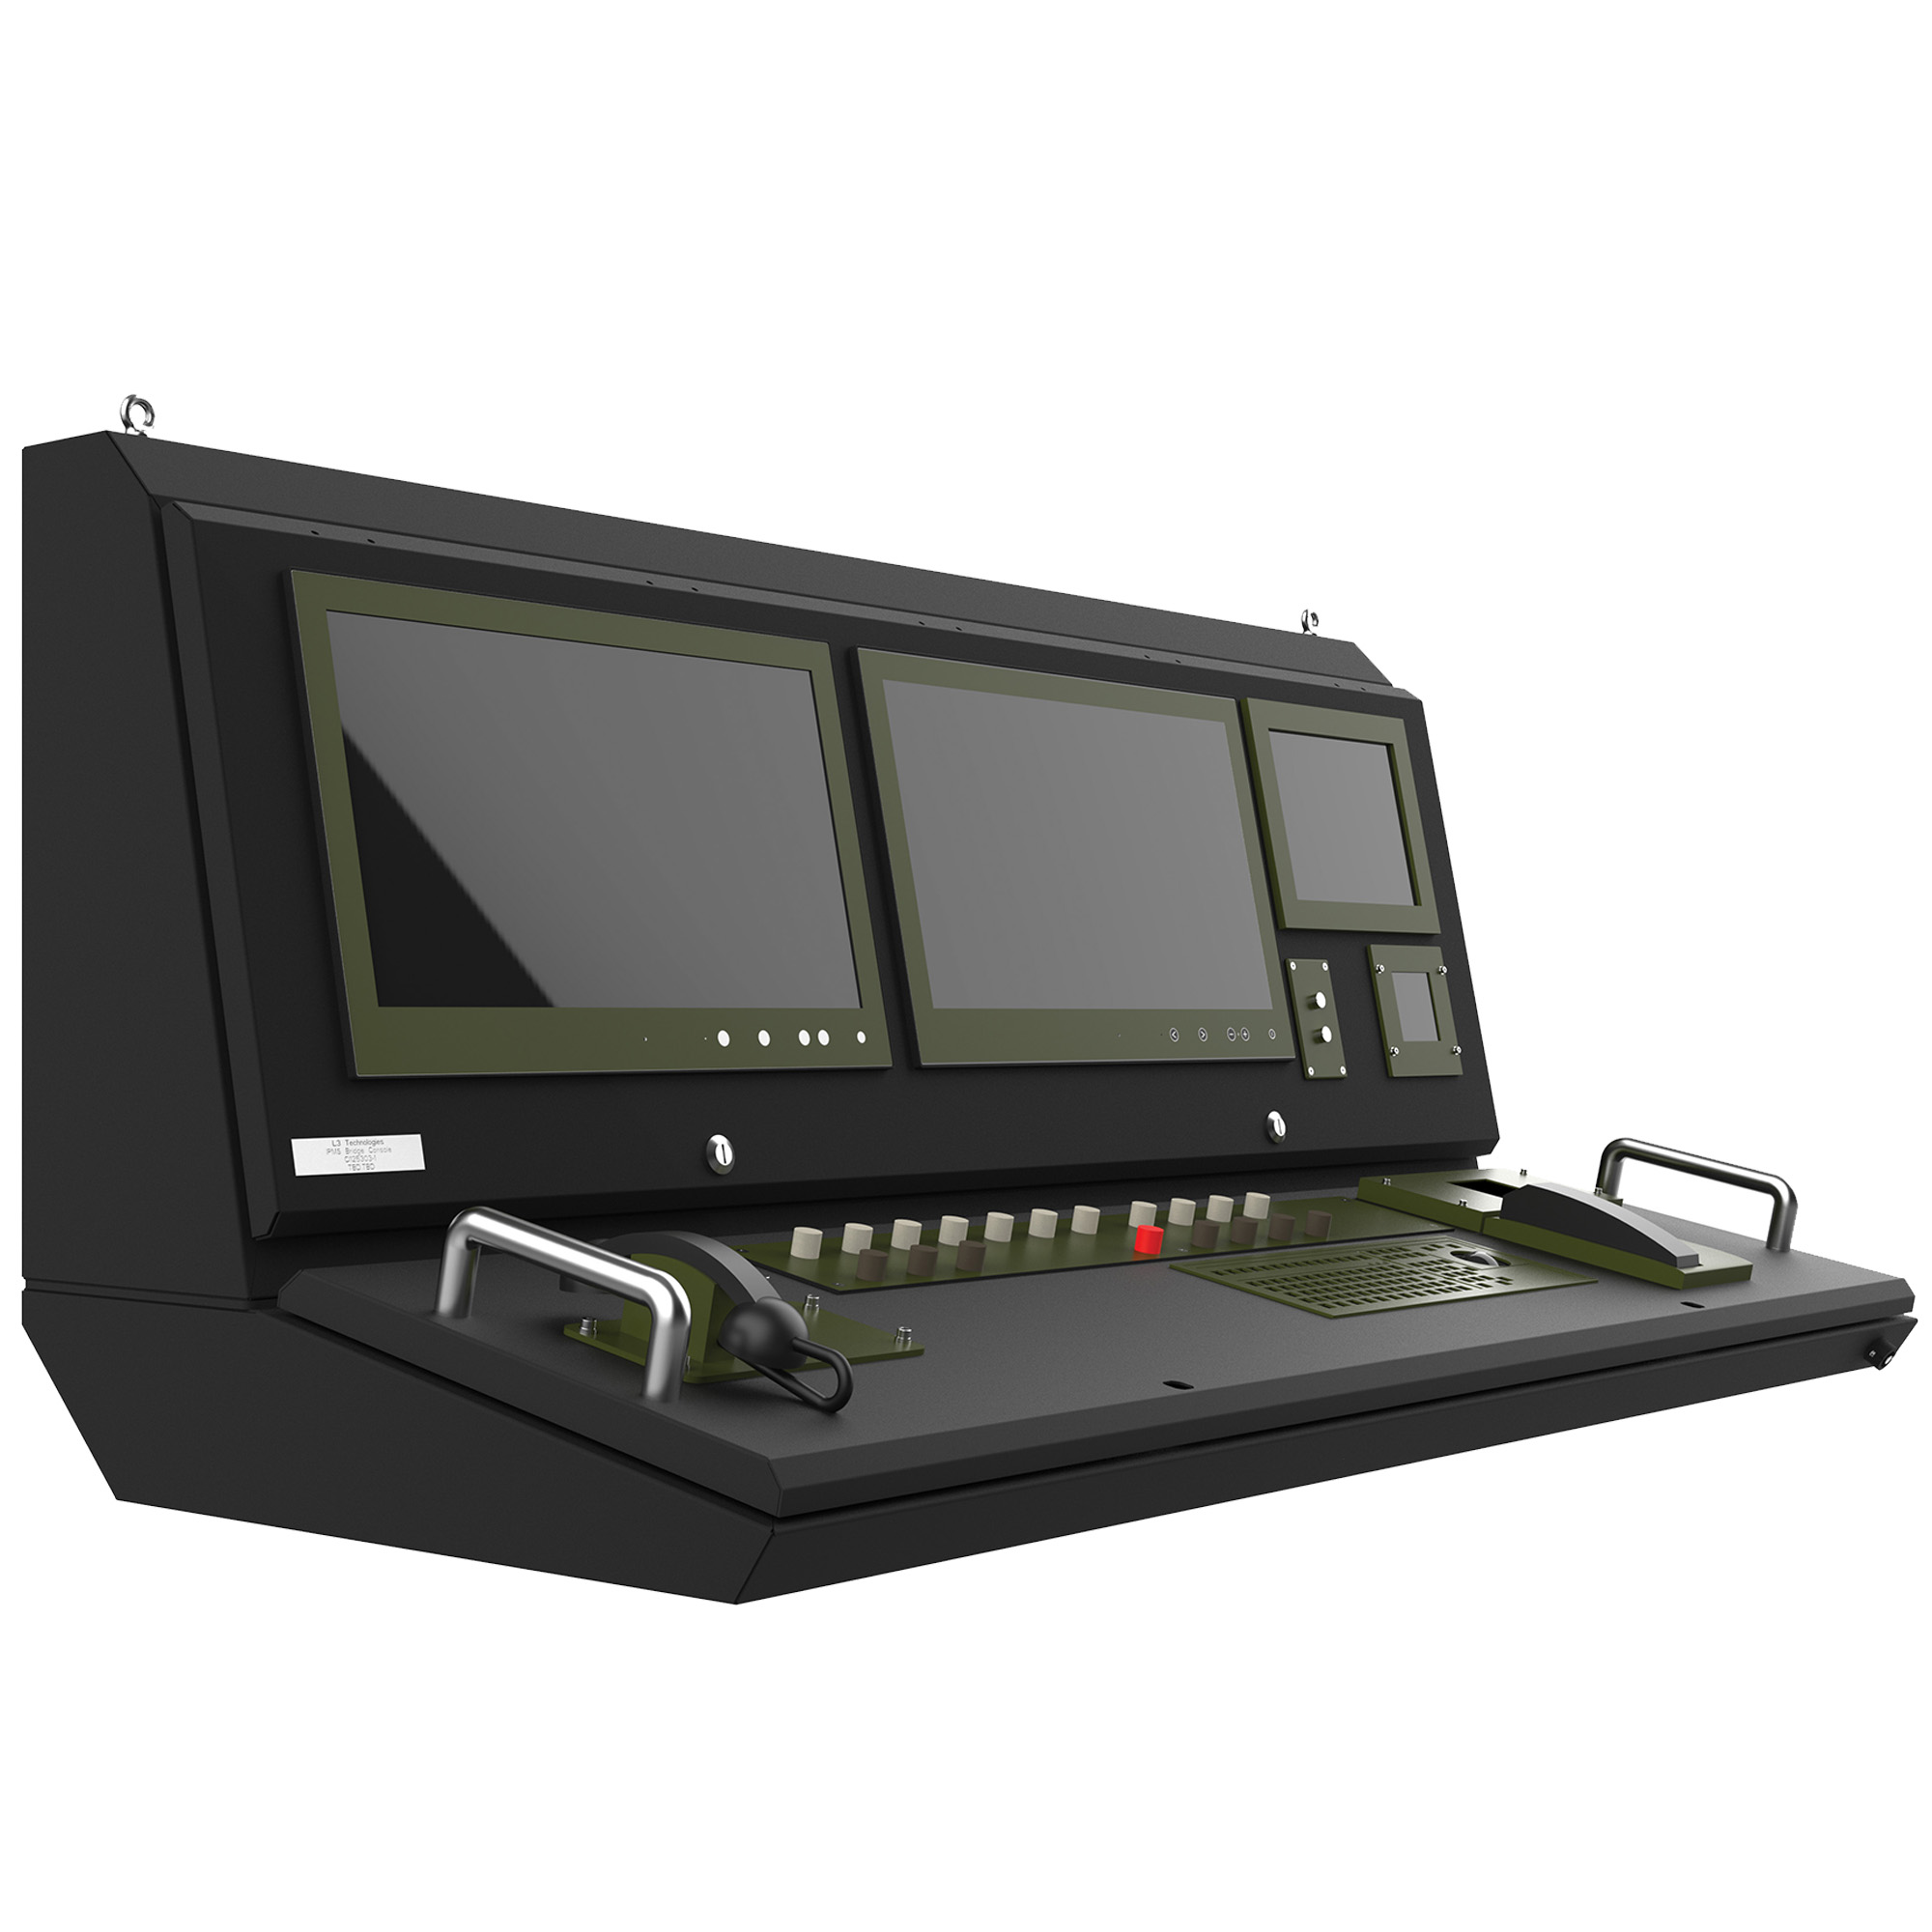 CONSOLE_LBS14705 RIGHT.ARMYGREEN